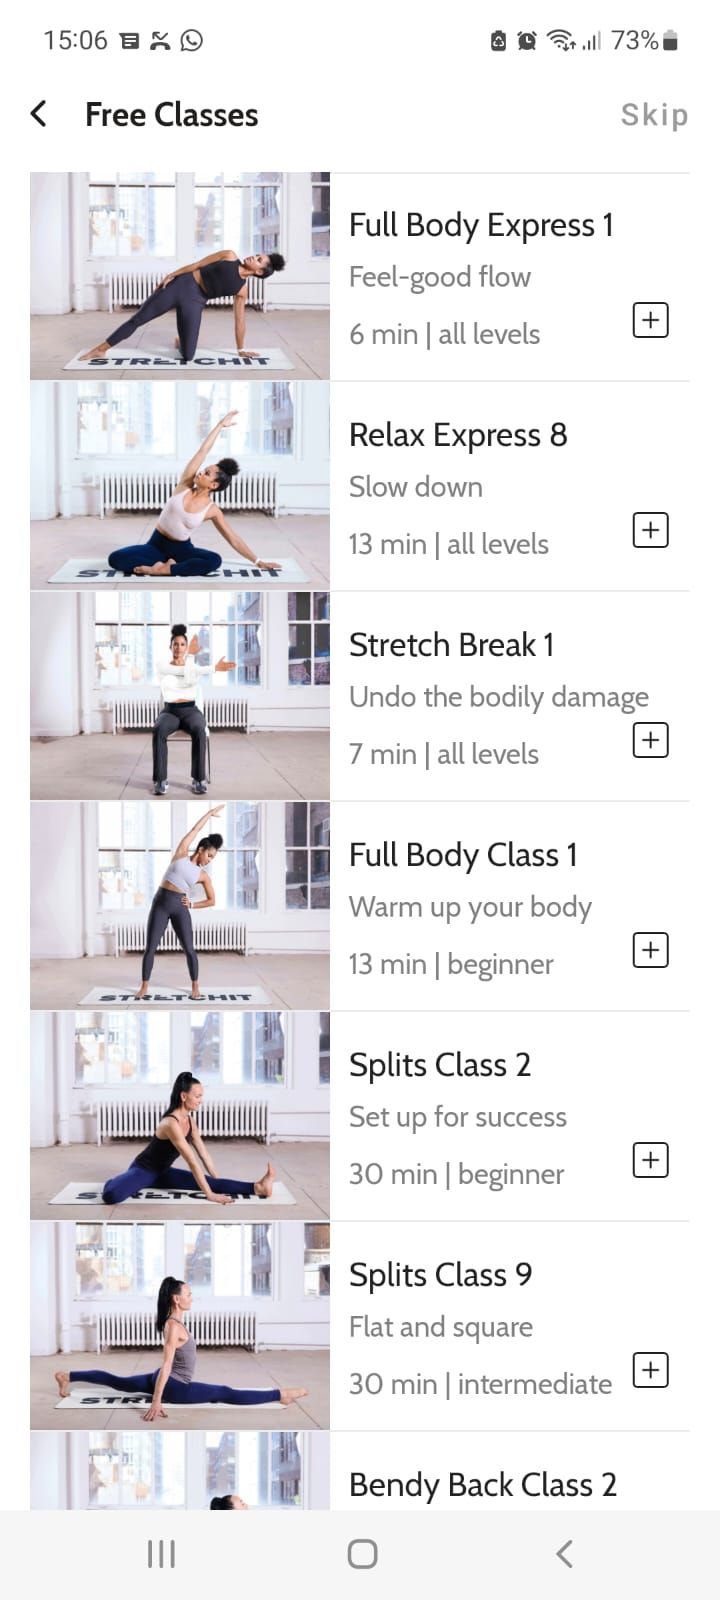 stretchit stretching app free classes